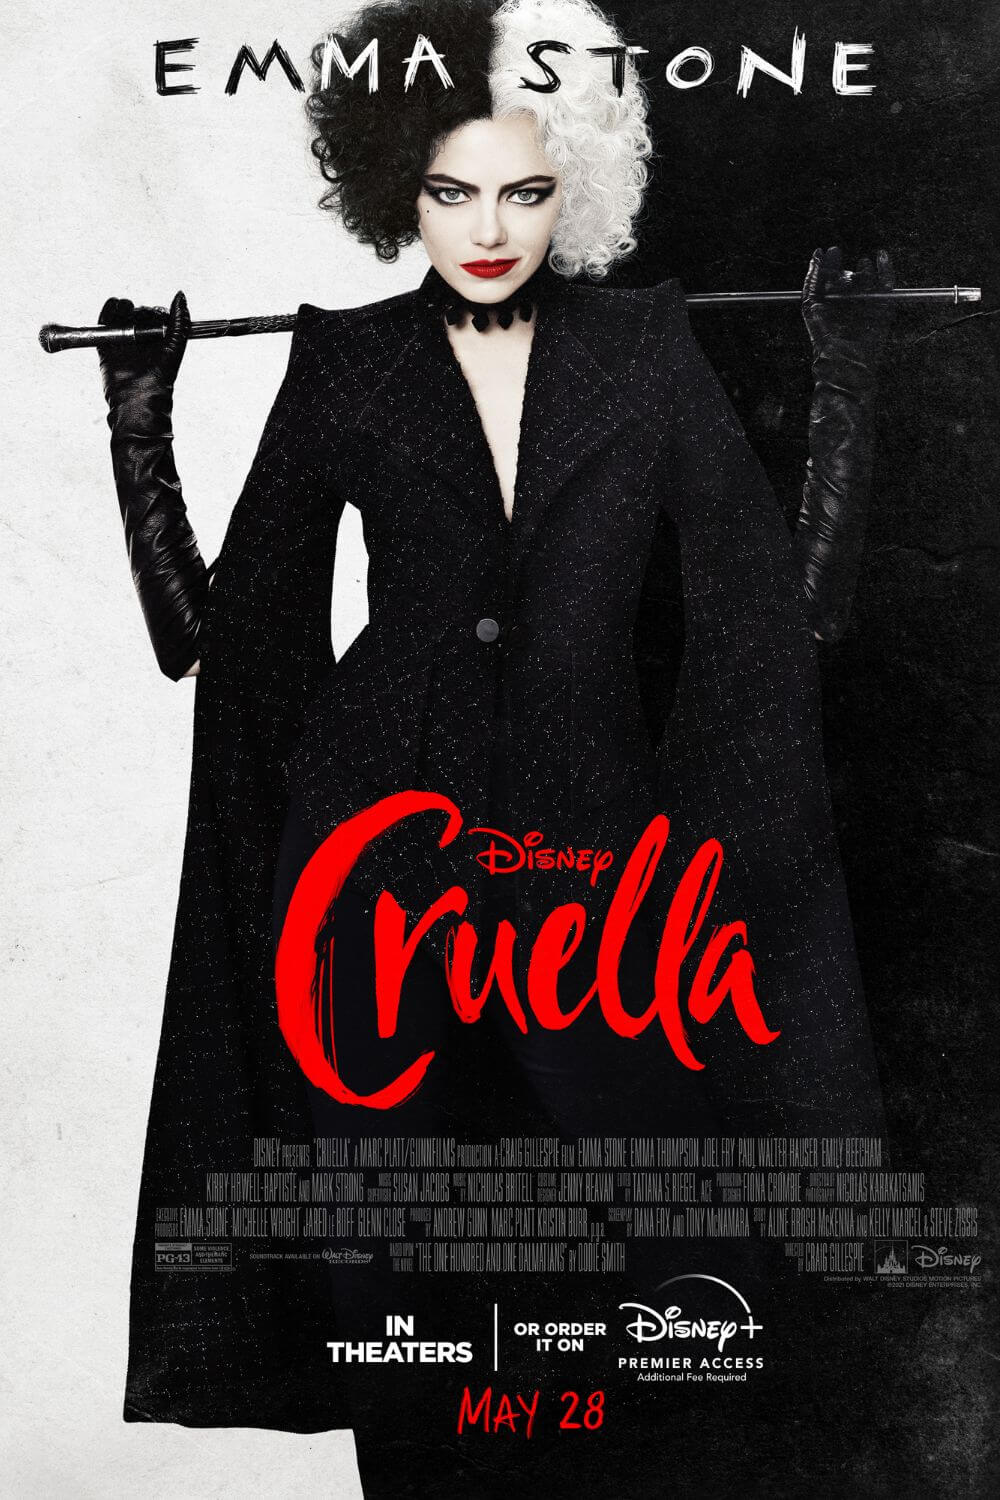 Promotional poster for the Cruella movie, with a photo of Emma Stone as the titular character.